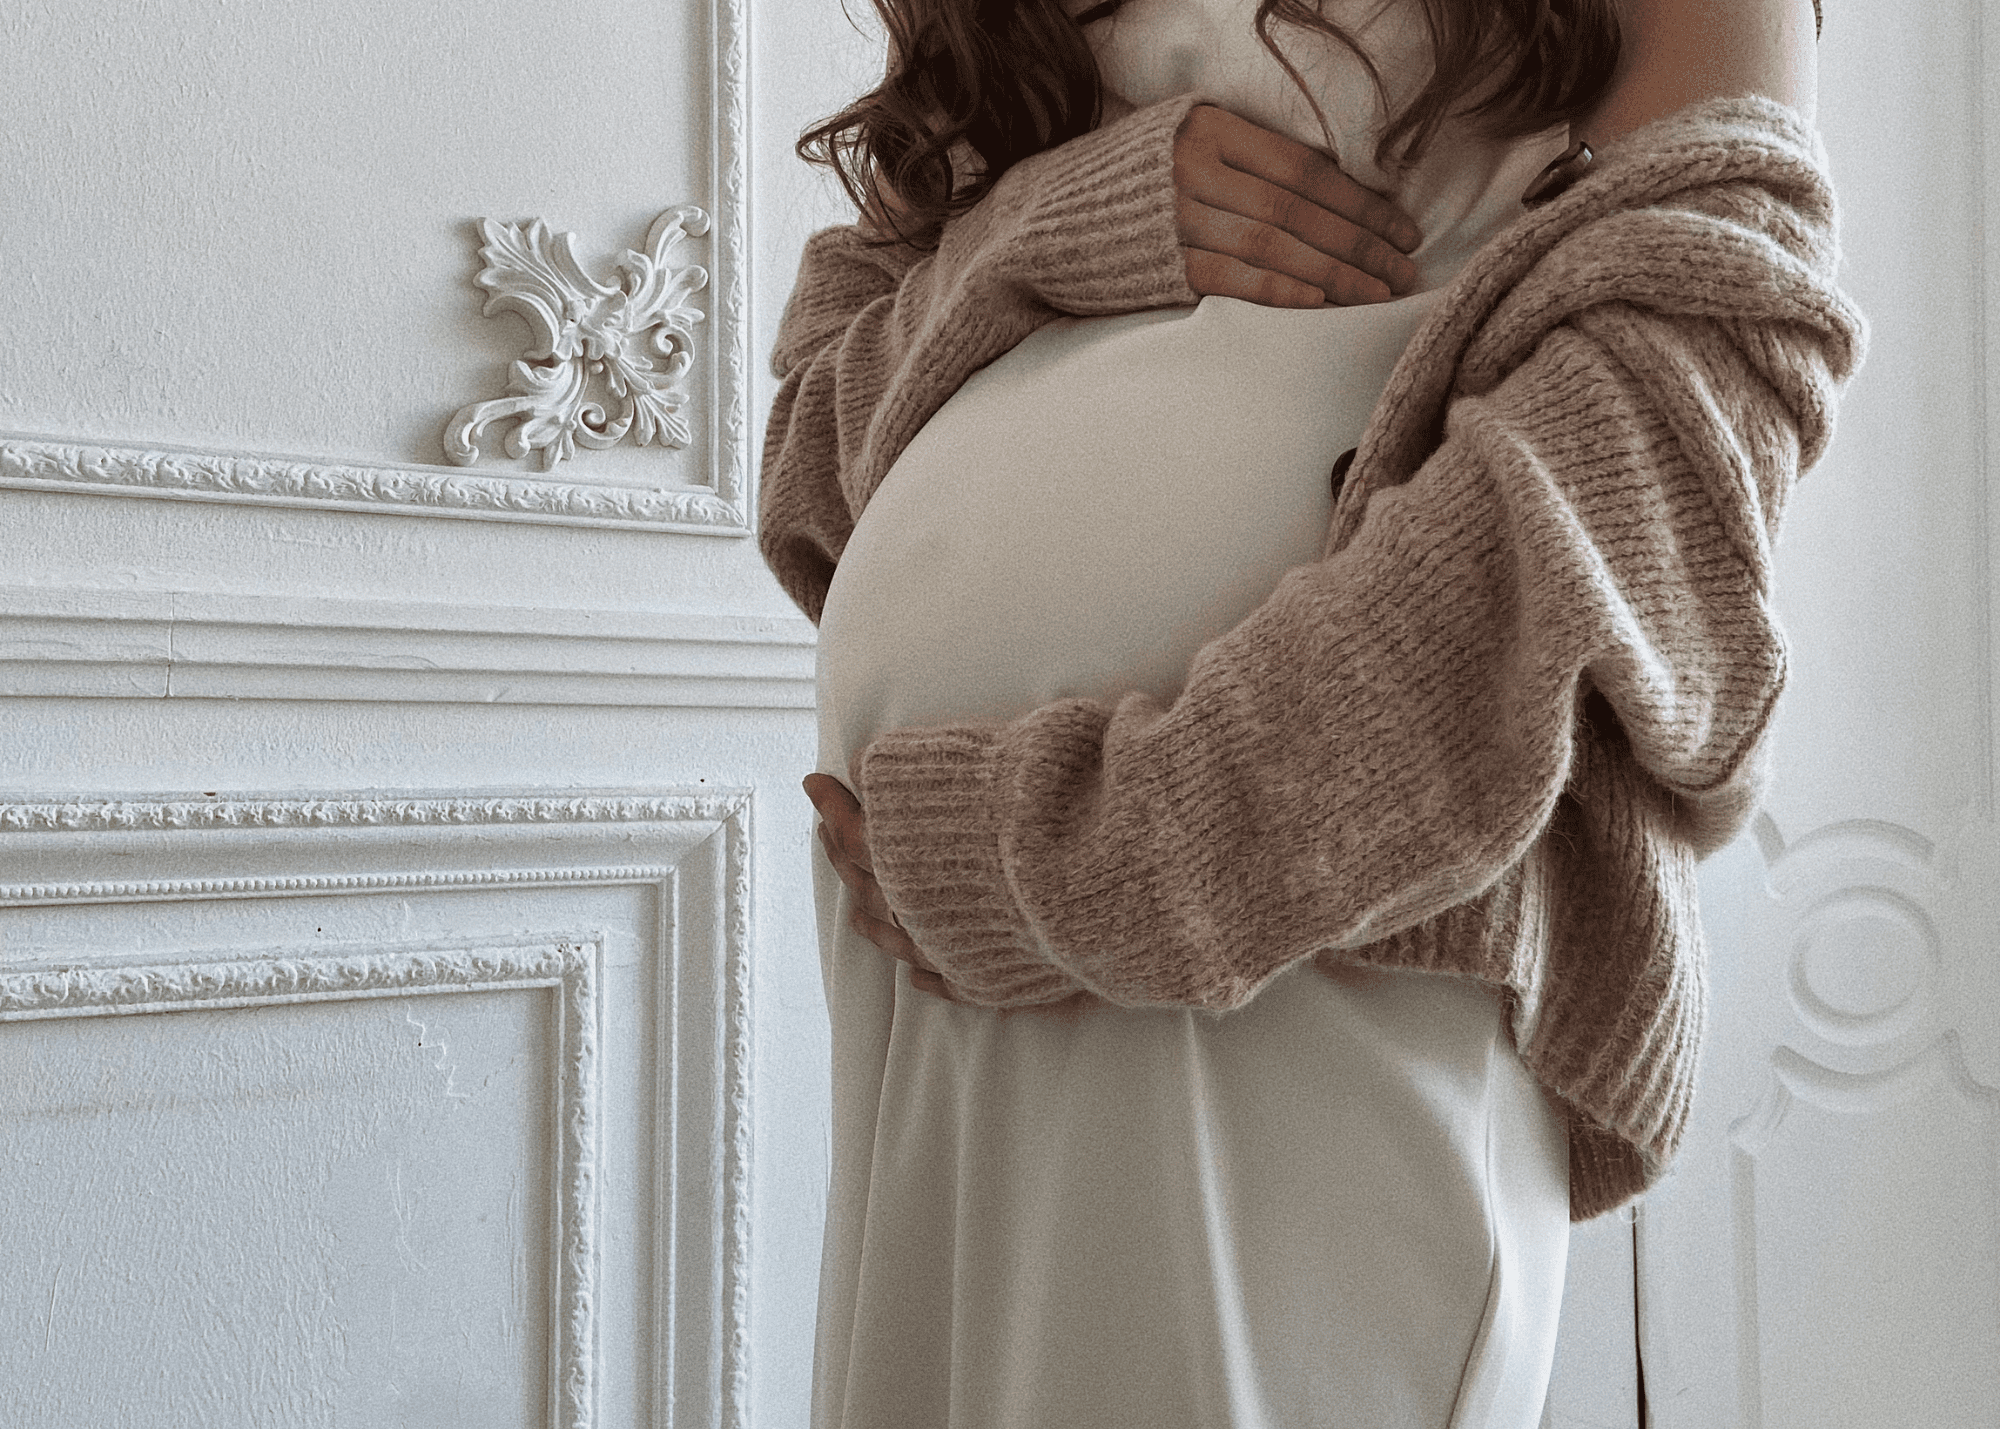 Taking care of yourself during pregnancy 